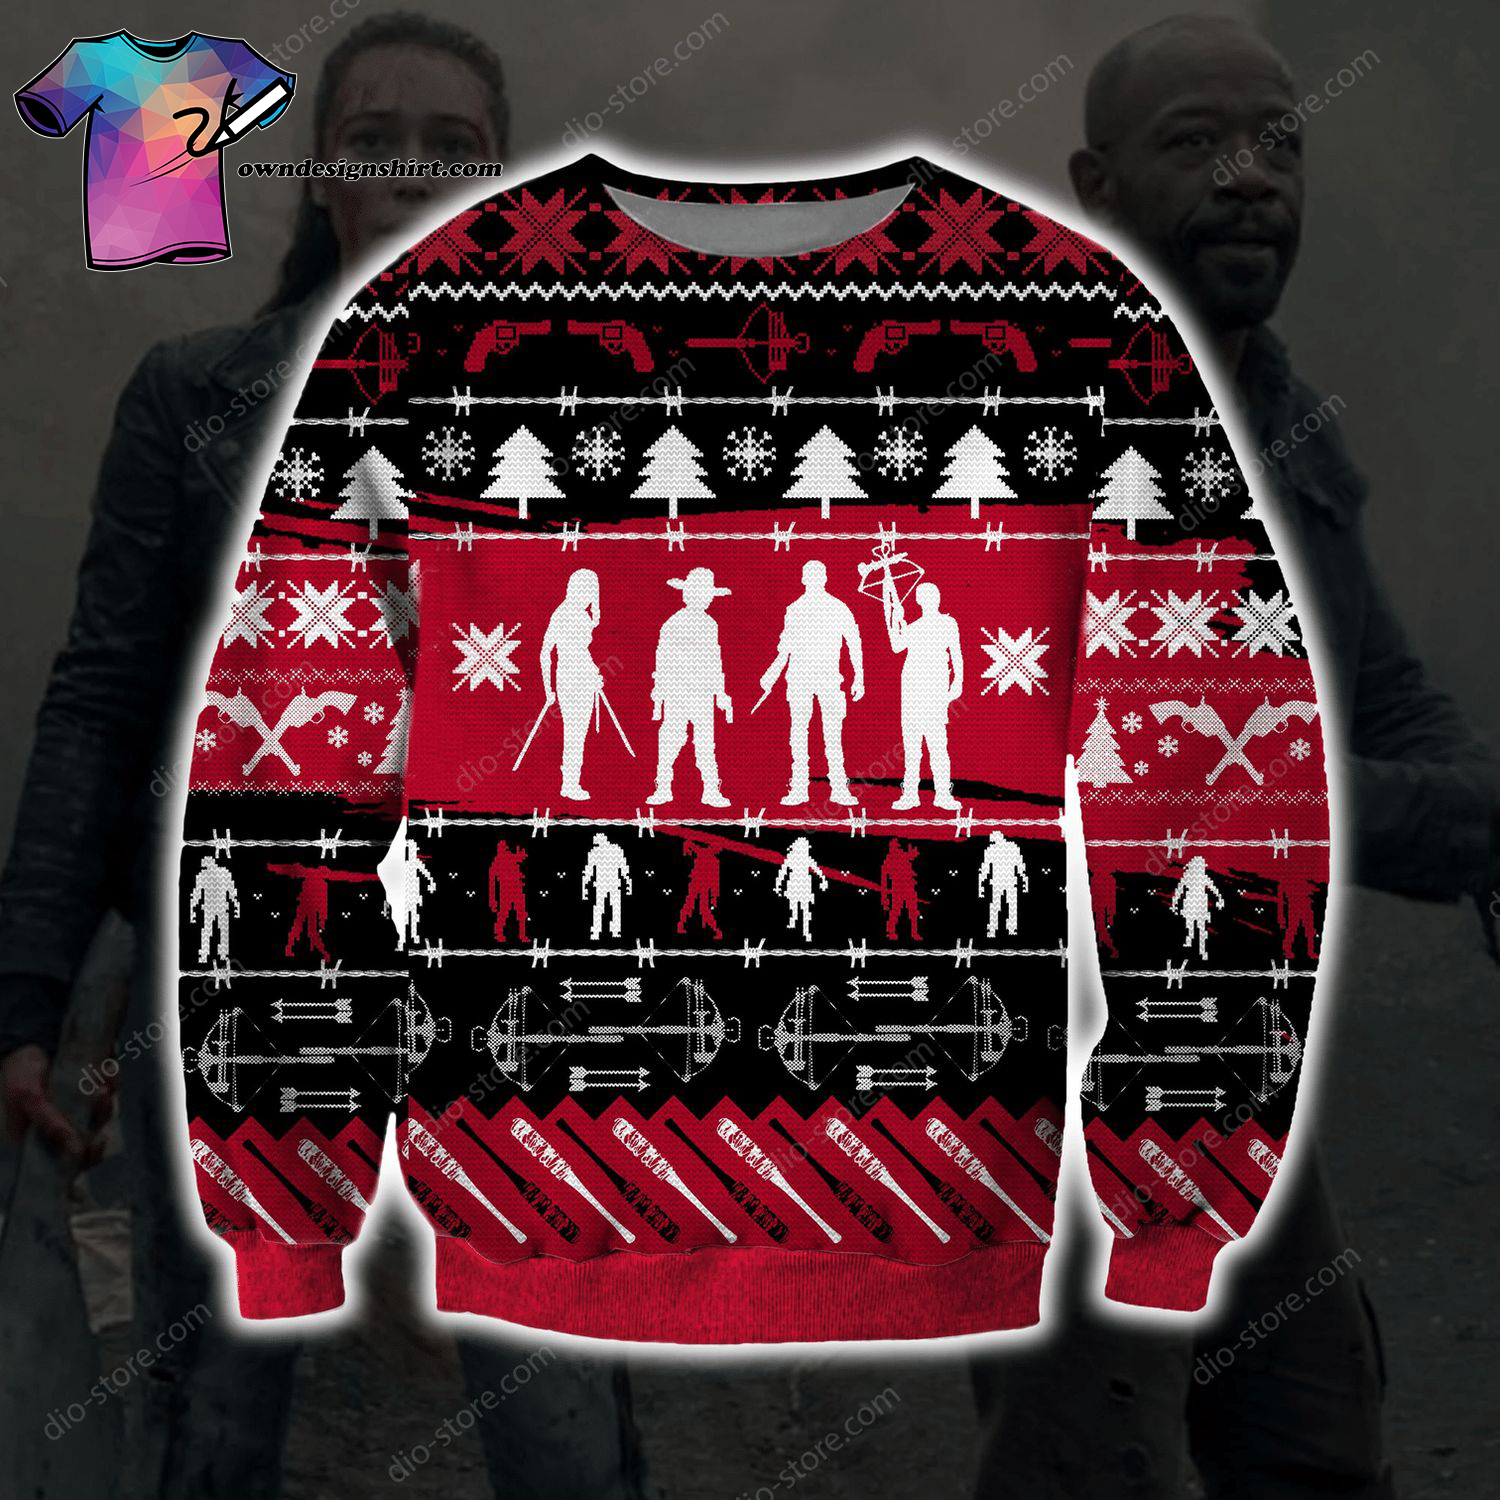 Tv Show The Walking Dead Ugly Christmas Sweater